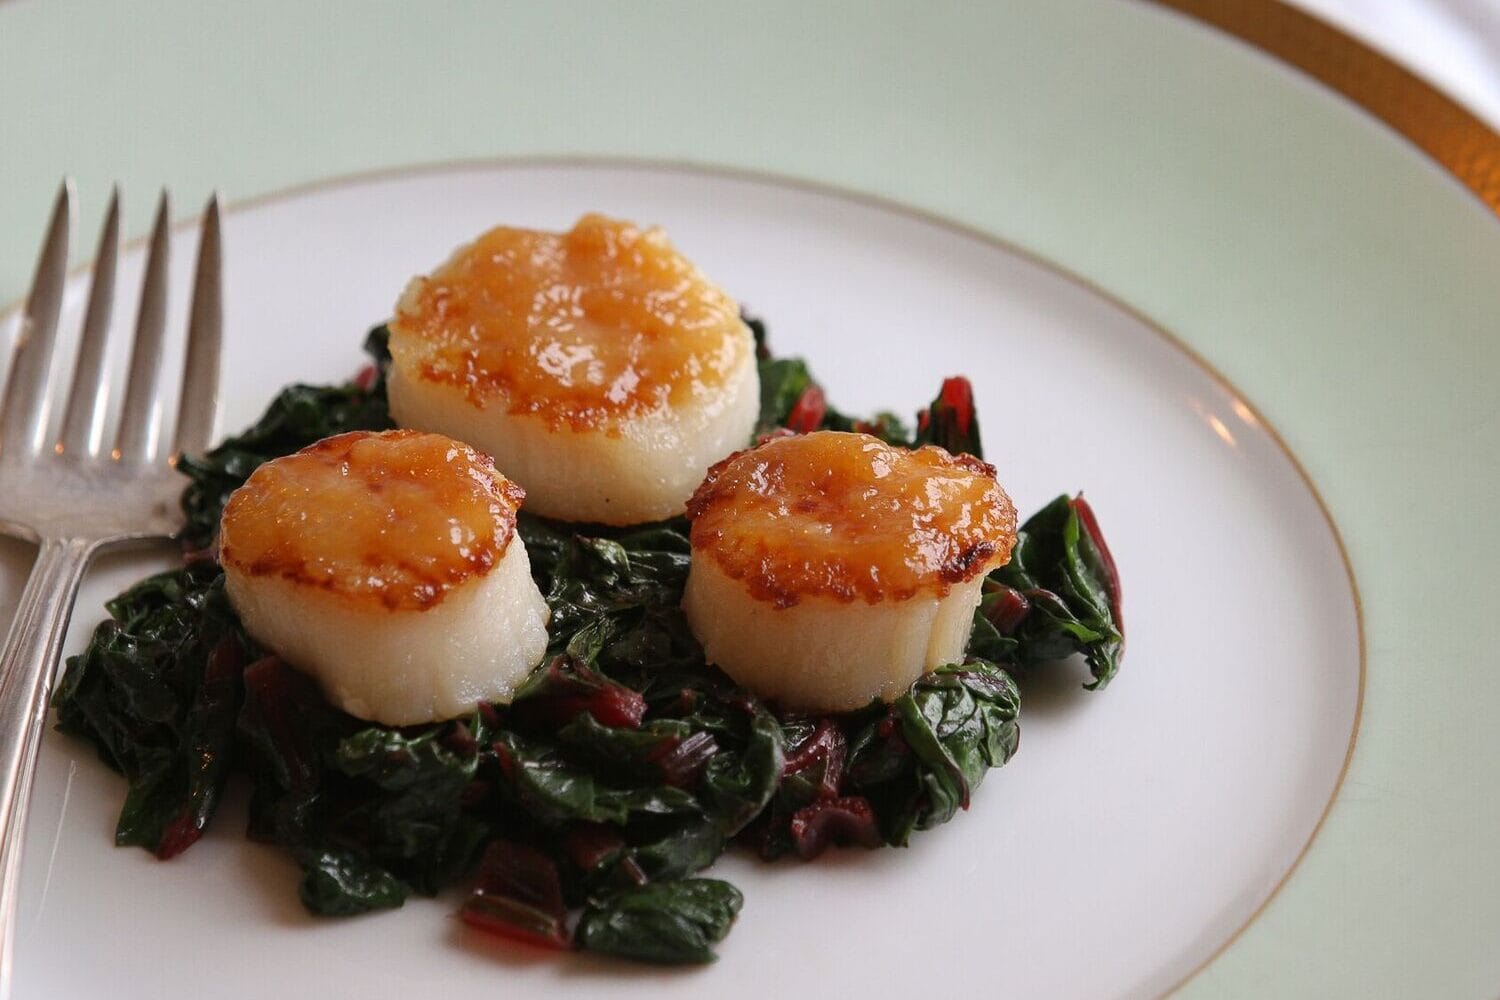 Seared Scallops with a Maple Miso Glaze over Swiss Chard